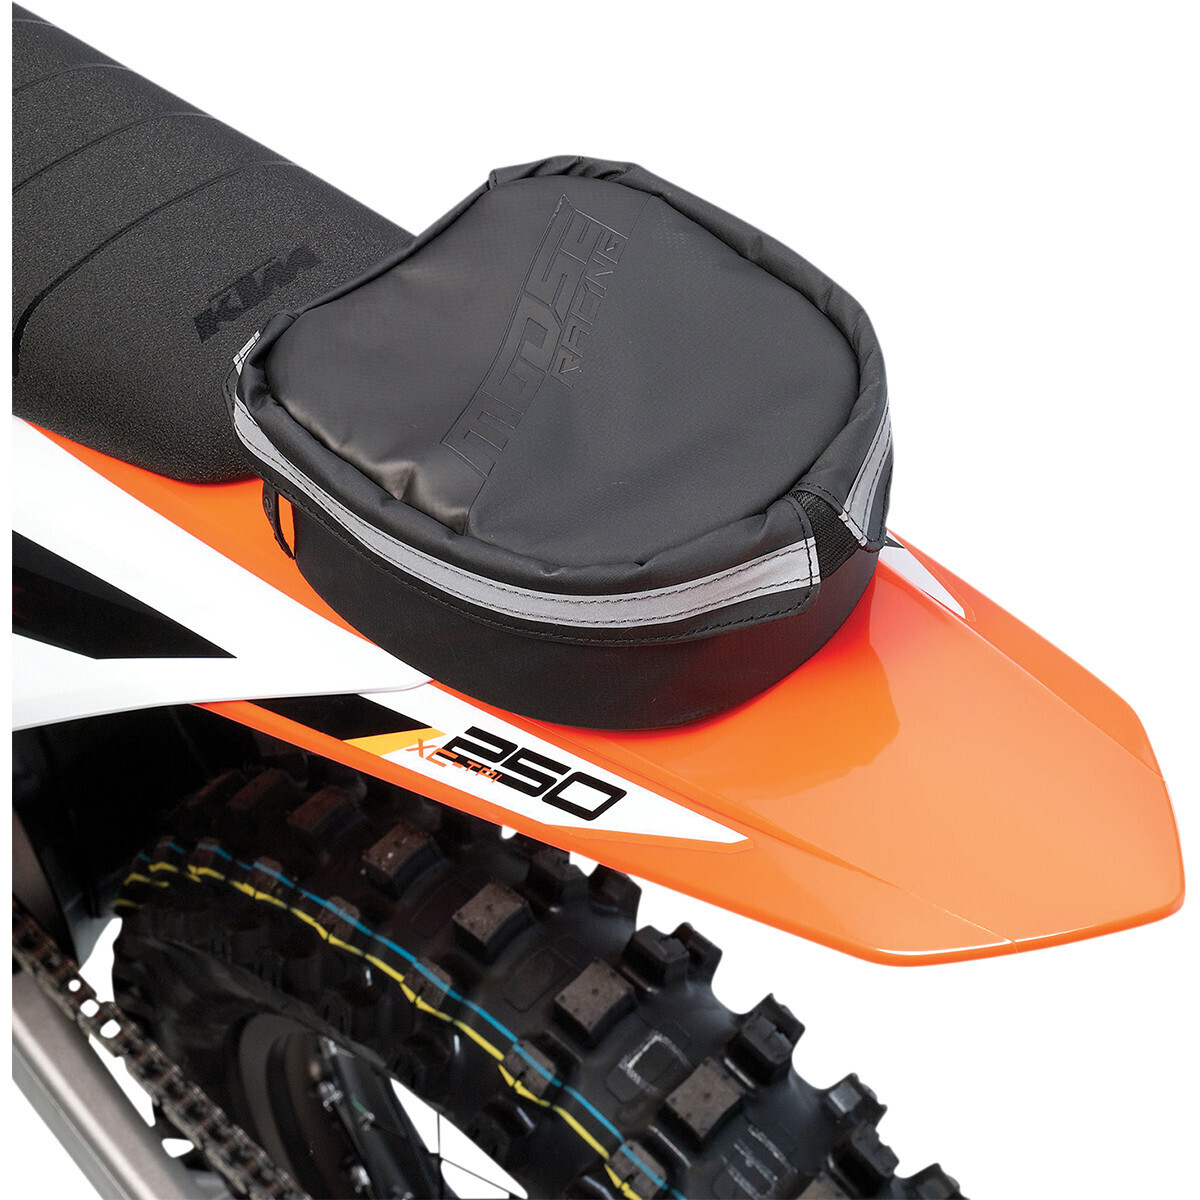 MOOSE RACING SOFT-GOODS
PACK REAR FENDER SMALL